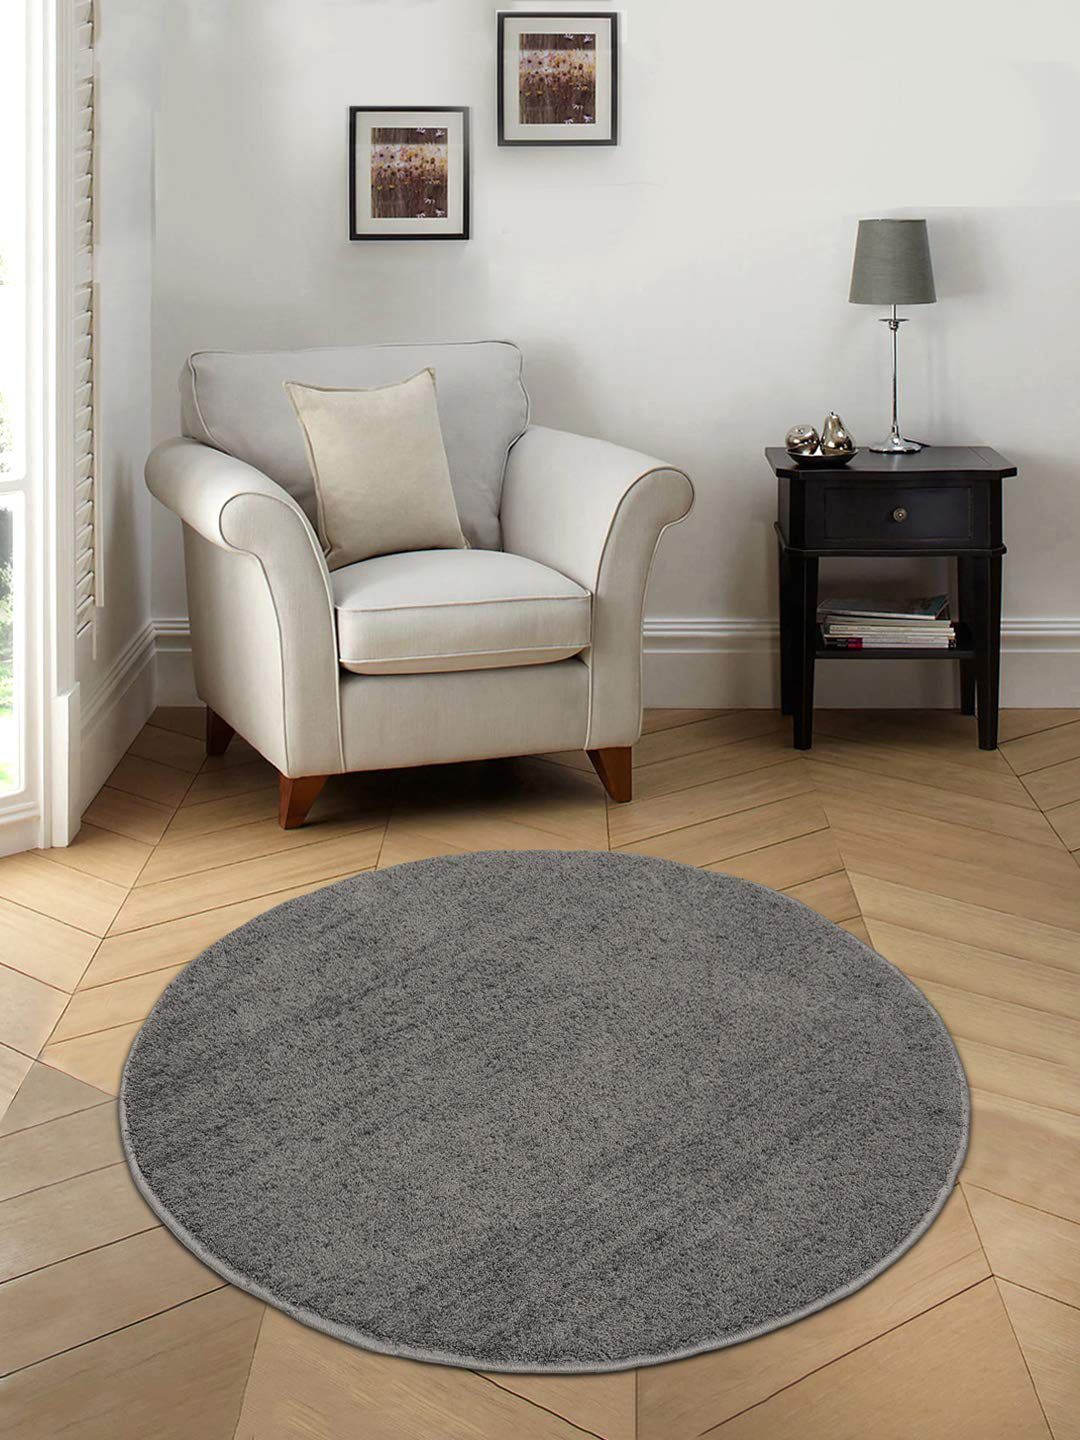 Saral Home Grey Cotton Anti-Skid Round Floor Mats Price in India